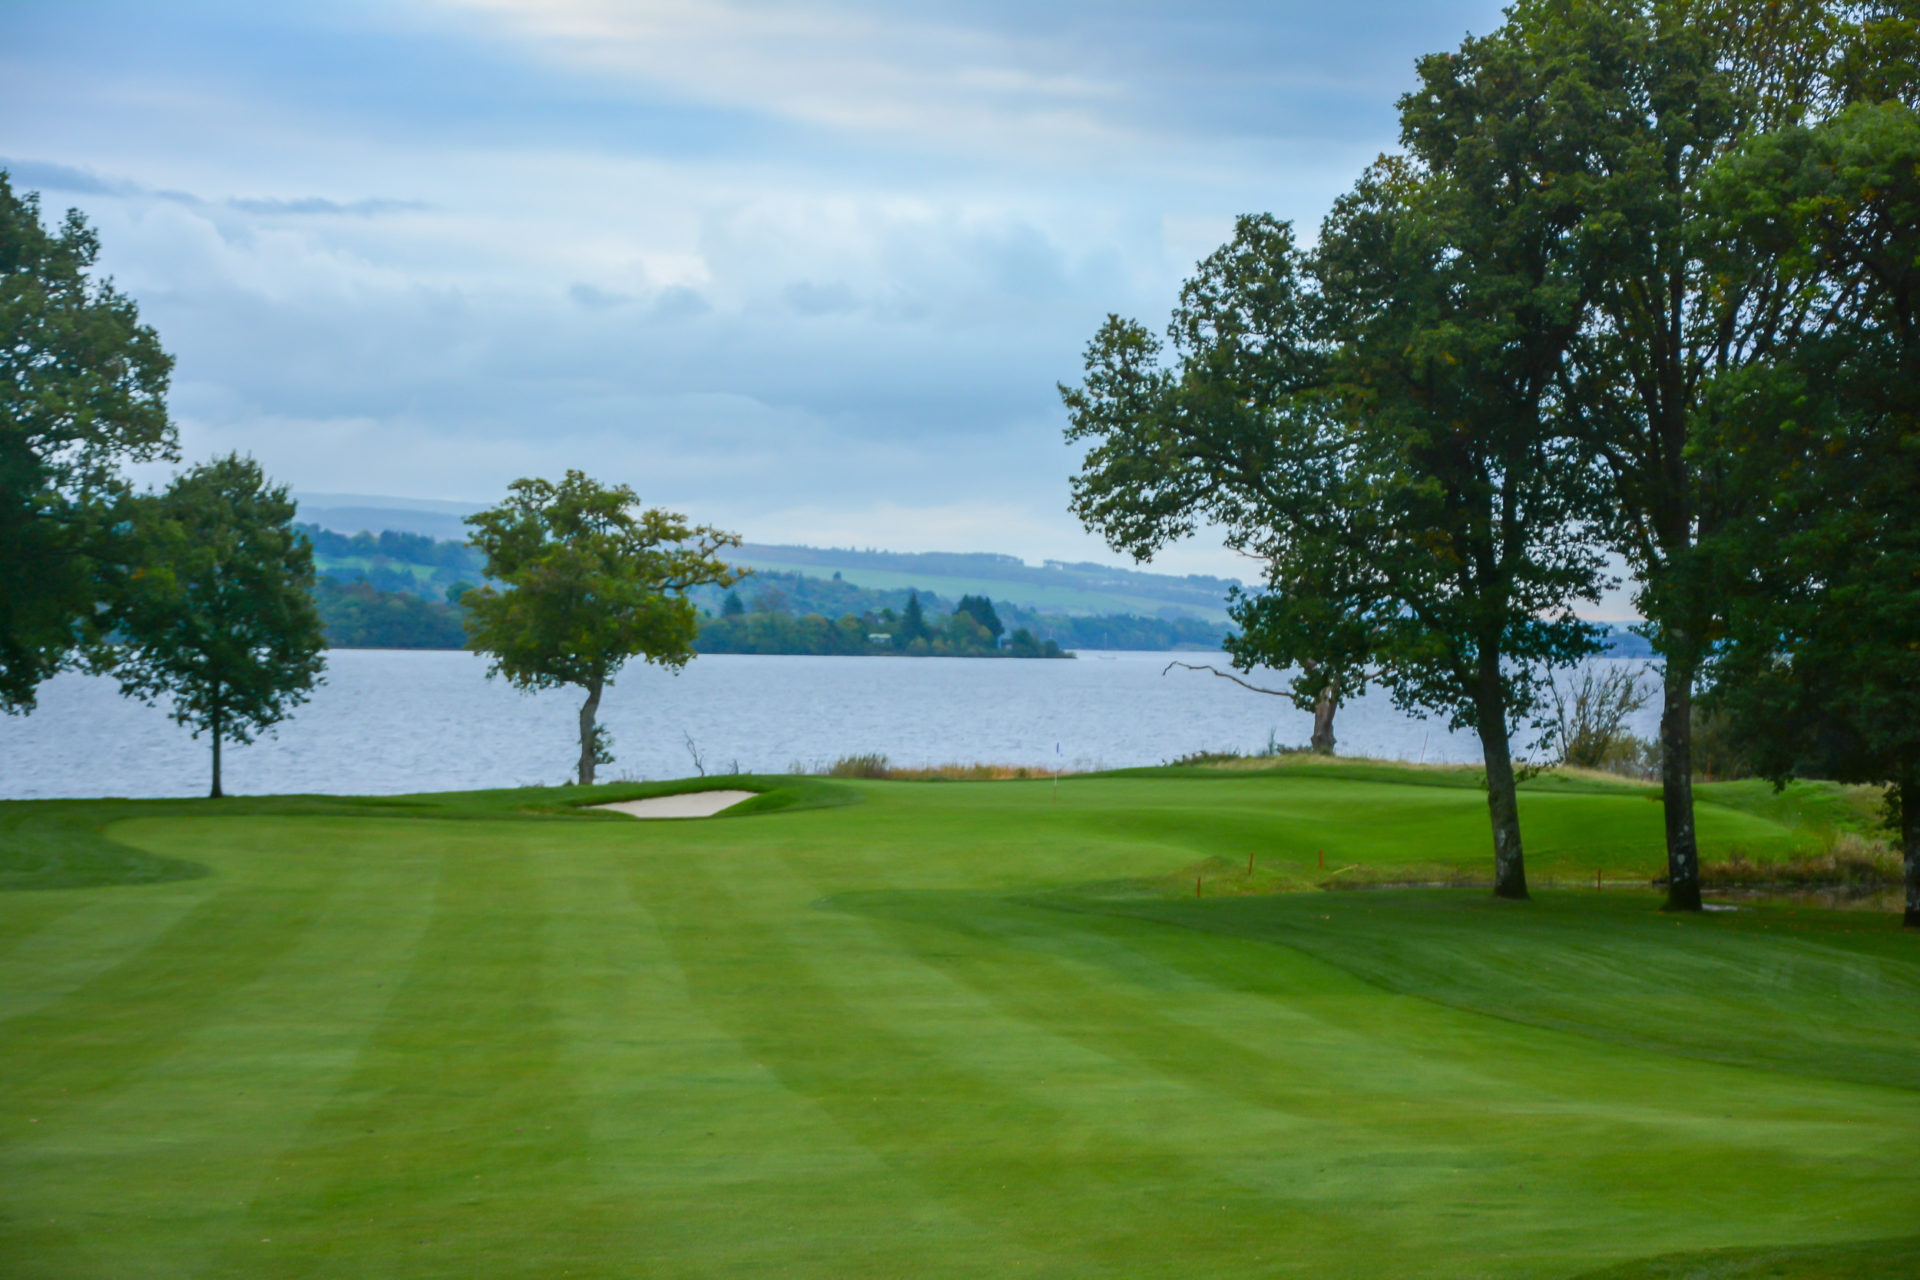 The approach shot on the 3rd hole at Loch Lomond Golf Club